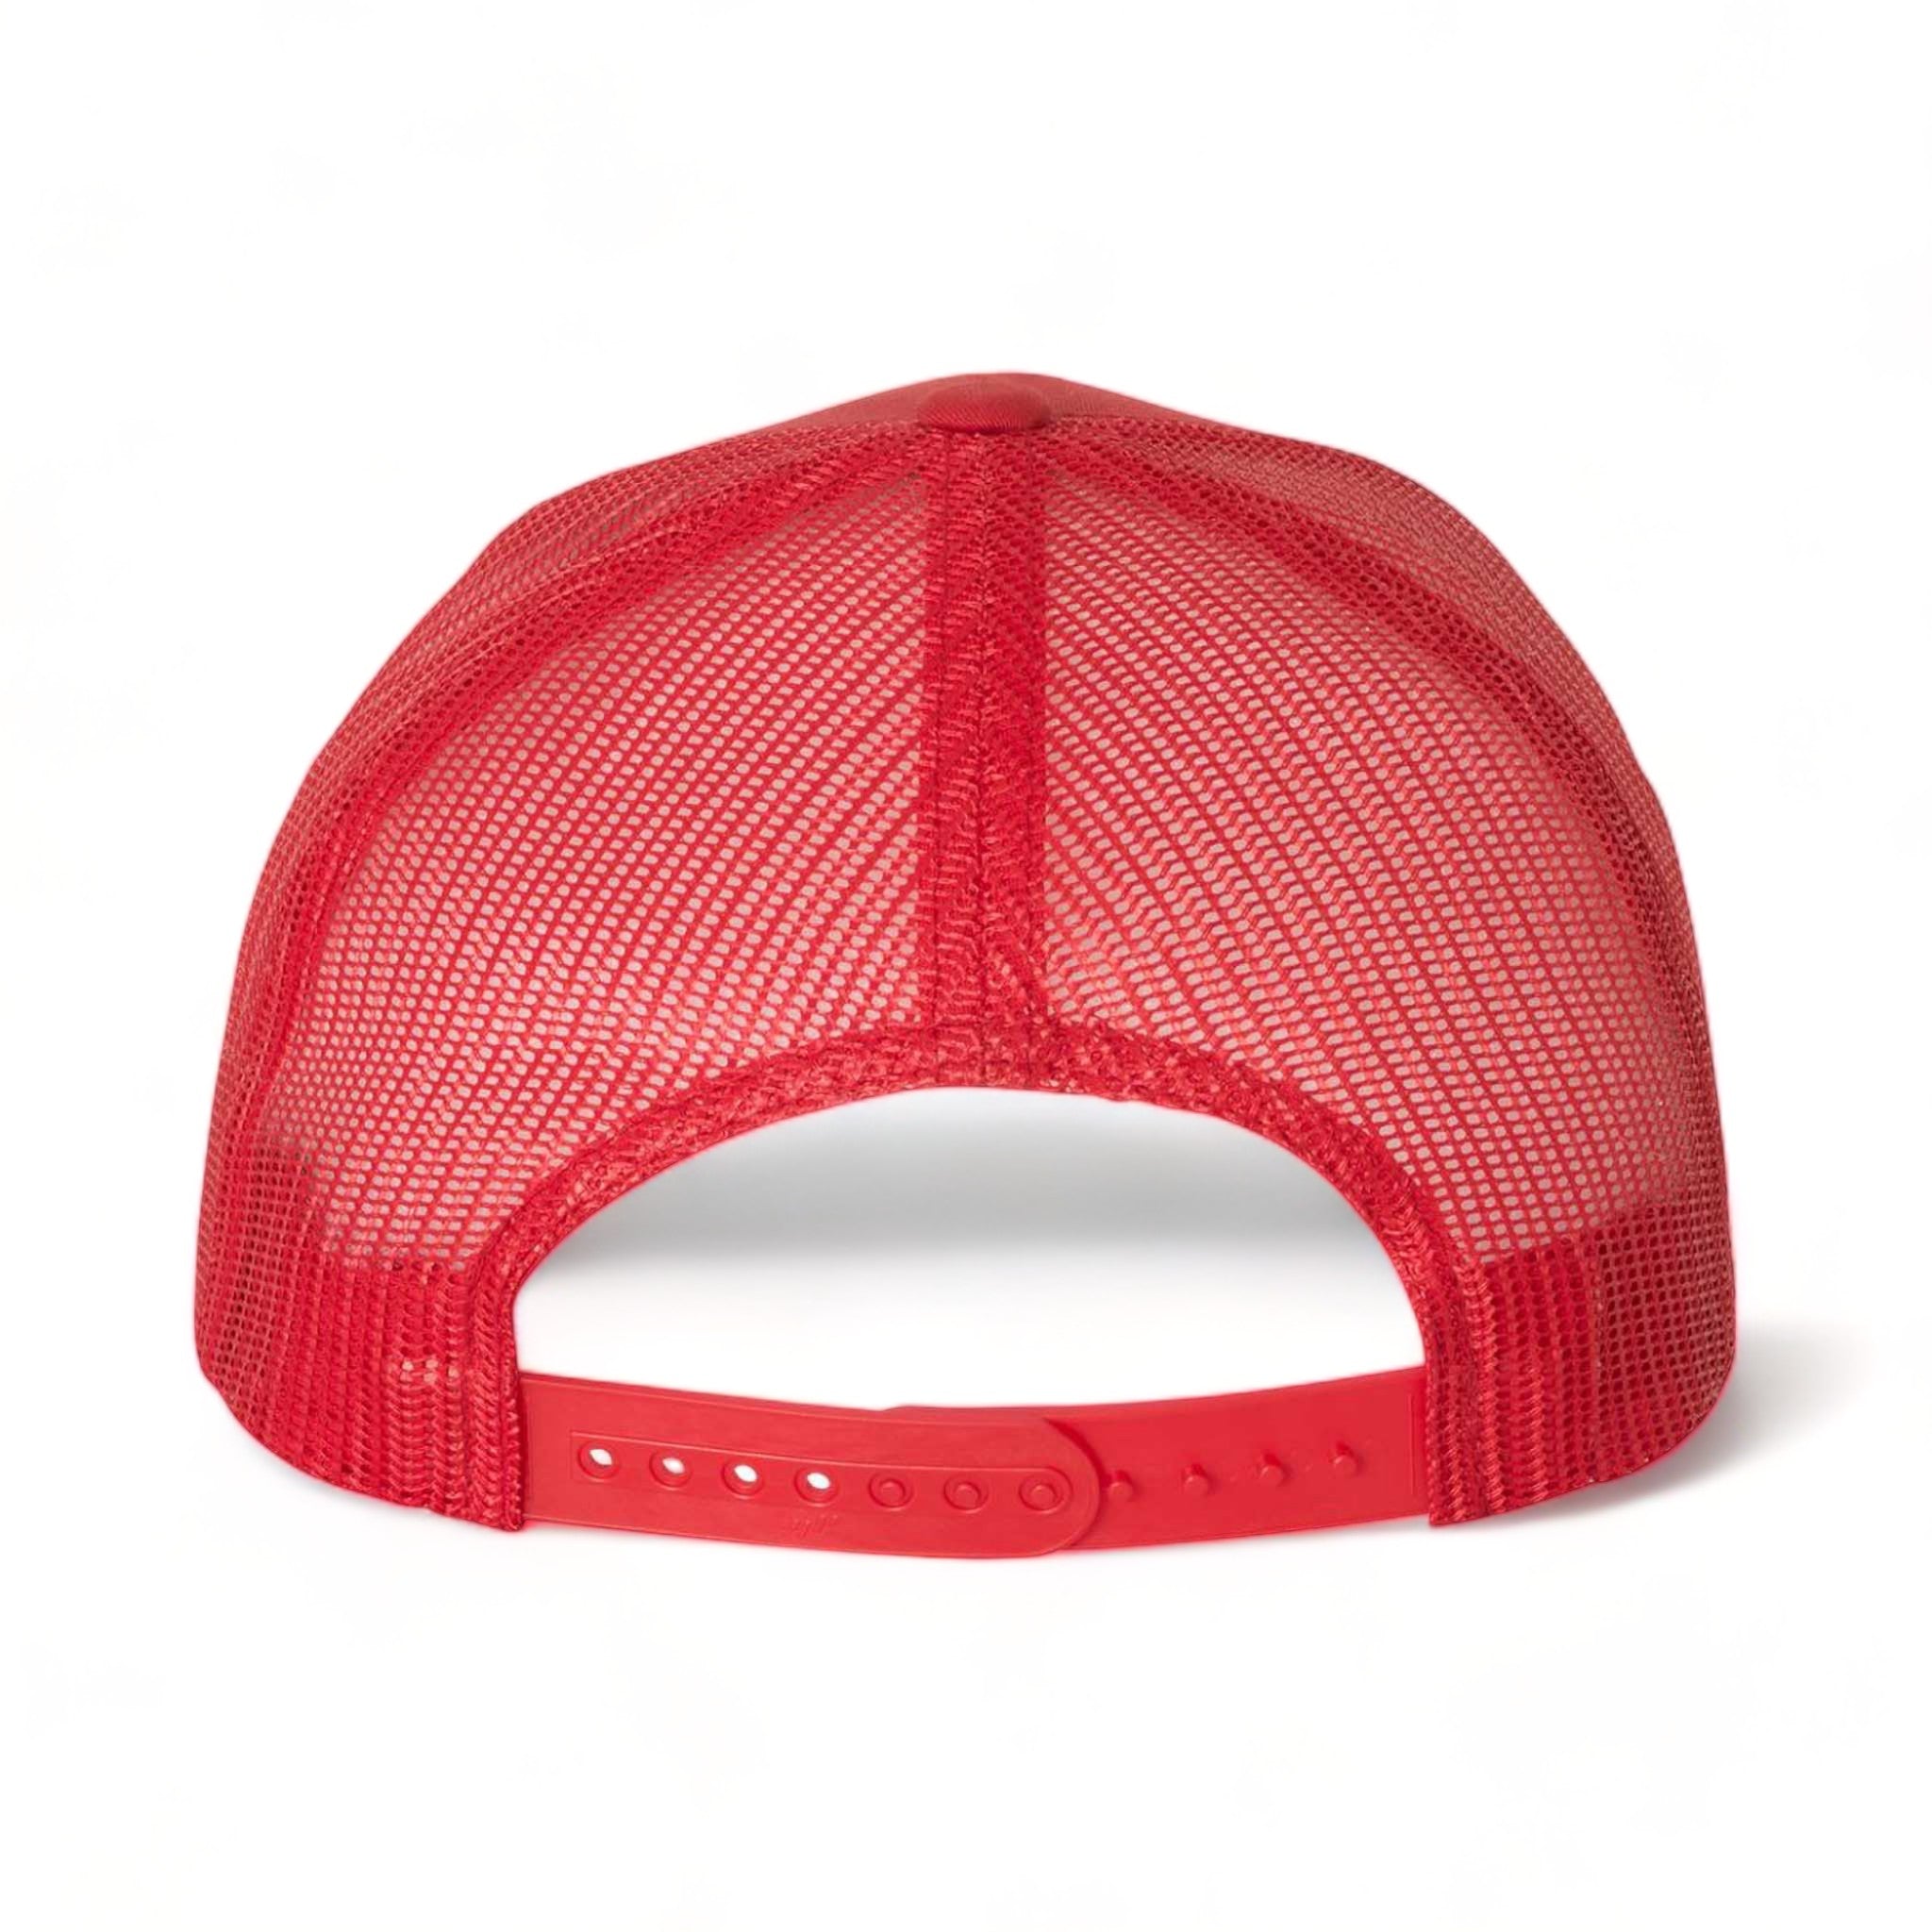 Back view of YP Classics 6506 custom hat in red